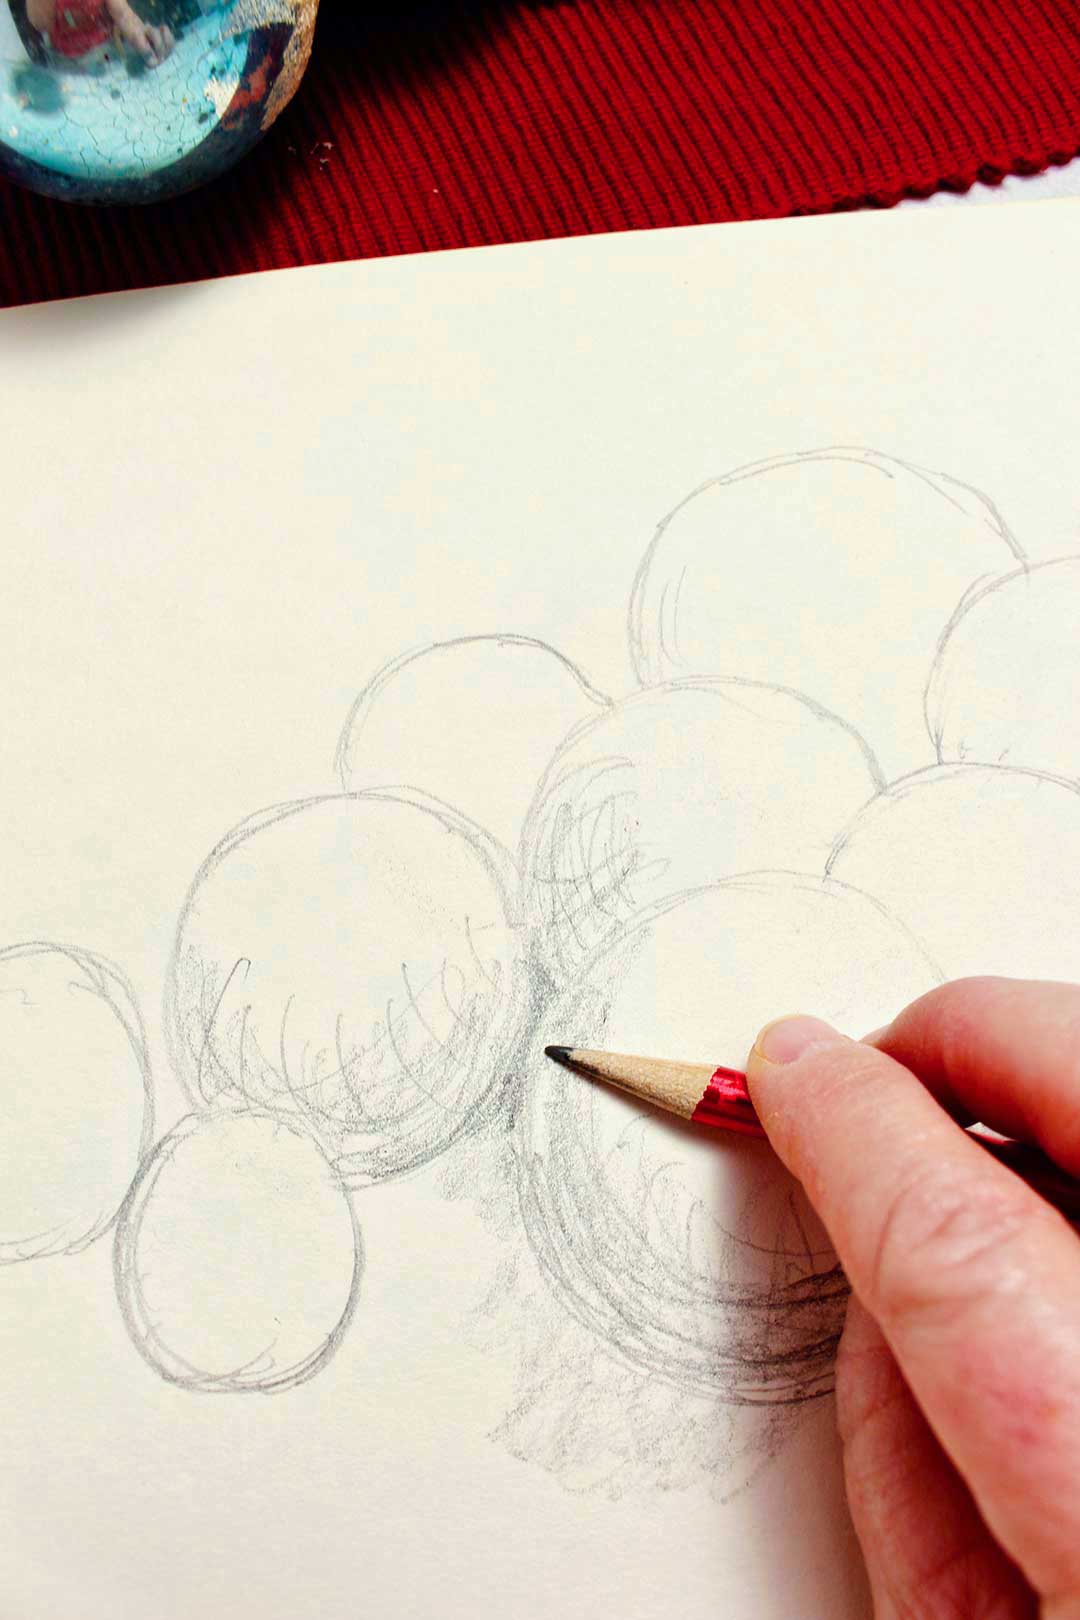 Close up view of a person shading their sphere drawing with pencil.